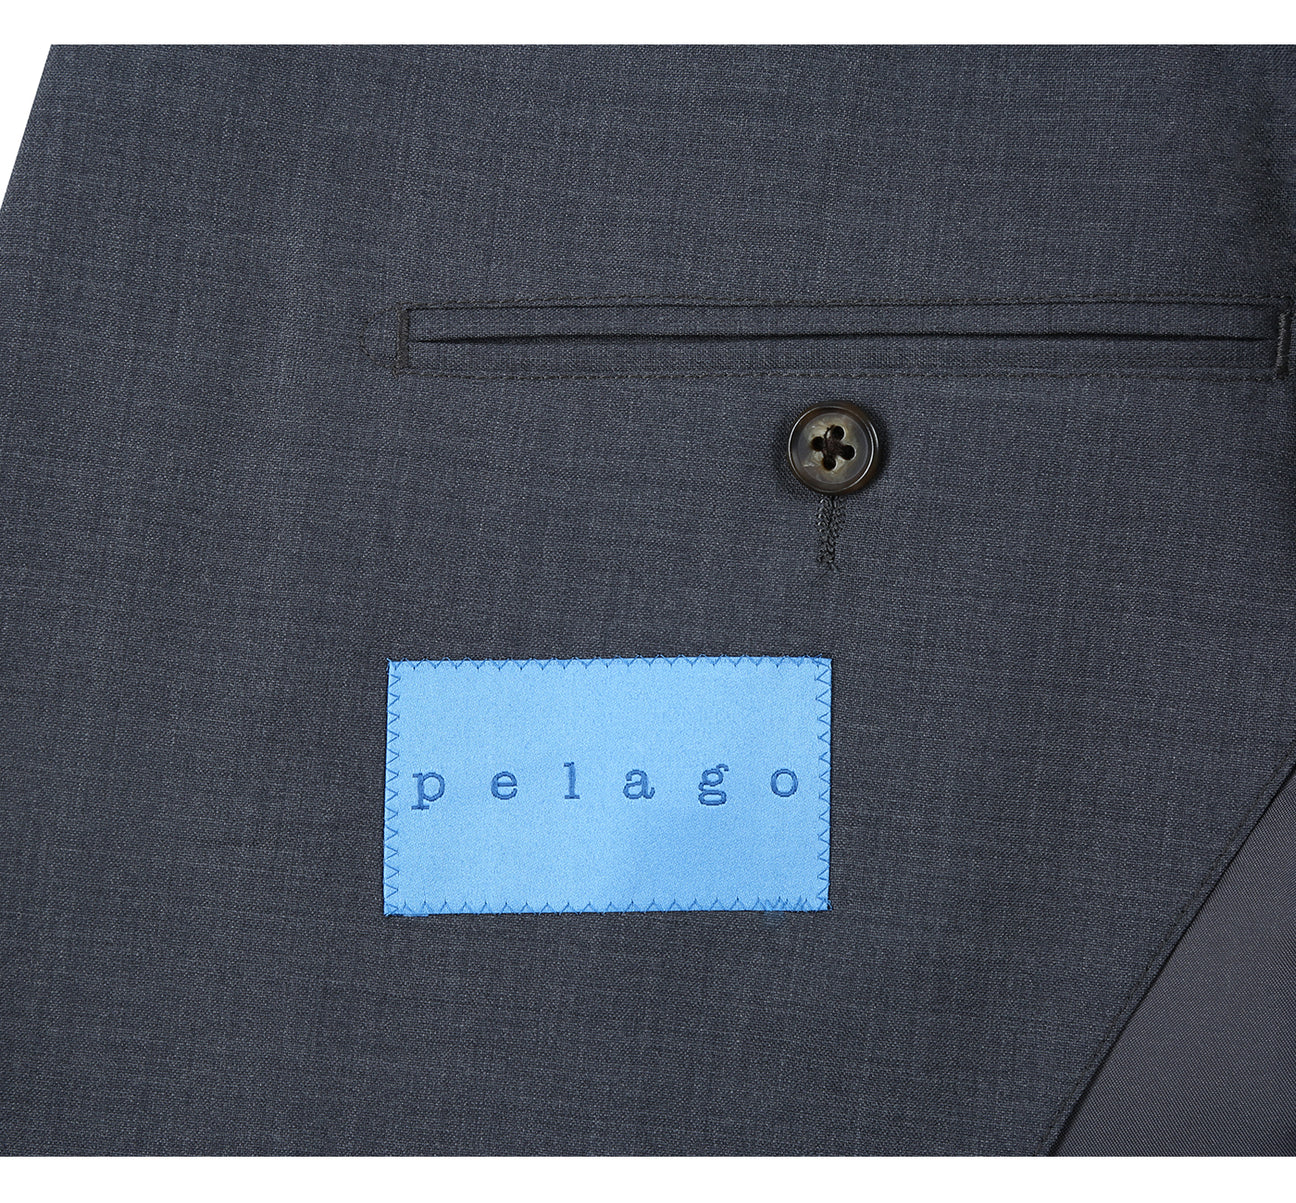 Pellagio Gray Slim Fit Travel Suit Anti-Microbial/ Nature Stretch/ Wrinkle Resistant PF20-18